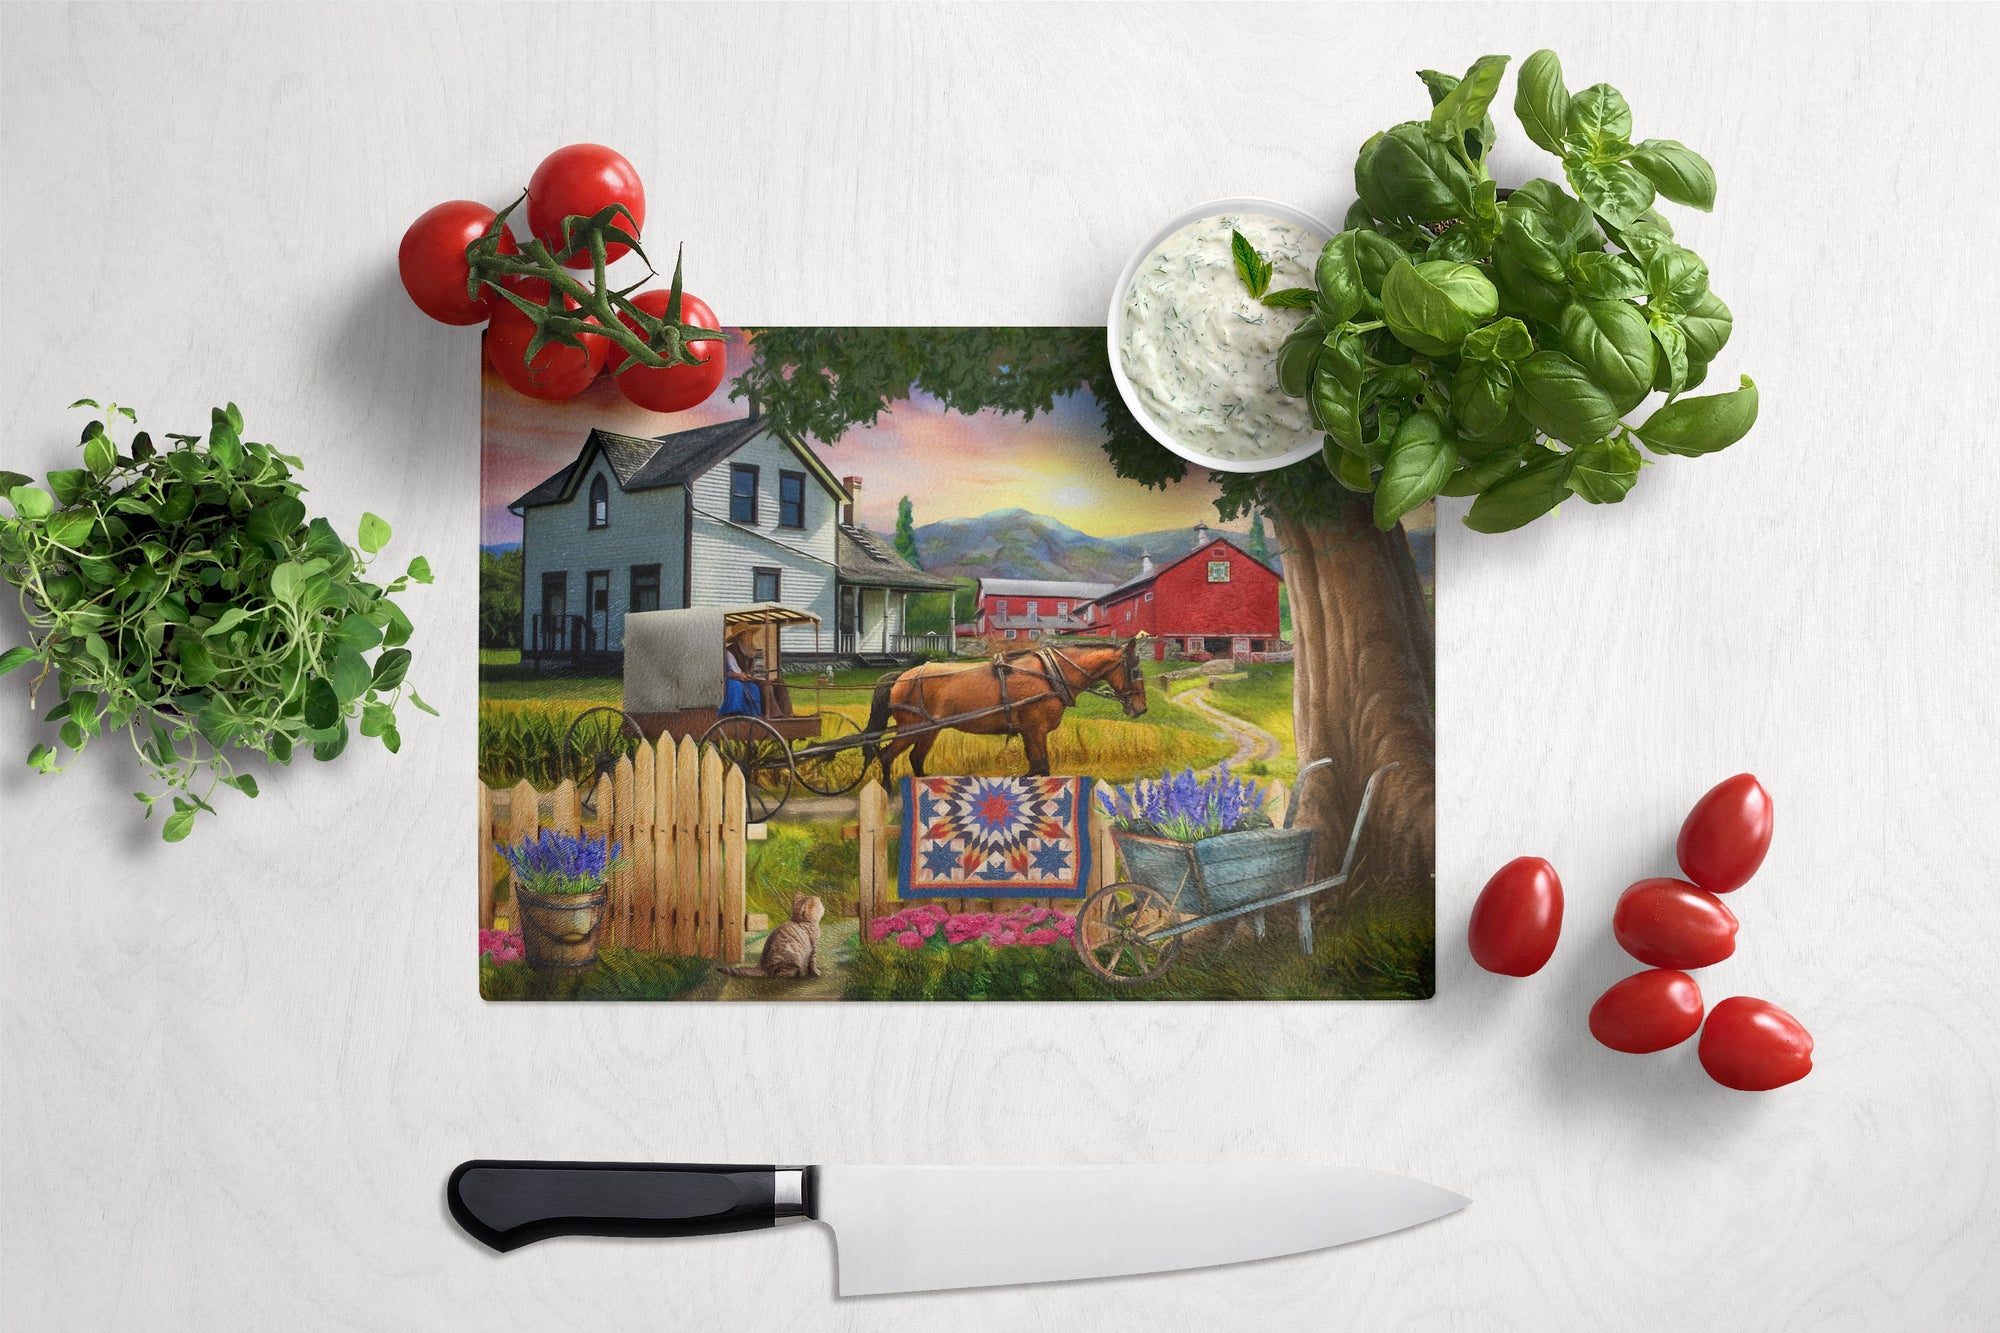 Headed Home for Dinner Farm Glass Cutting Board Large PTW2071LCB by Caroline's Treasures